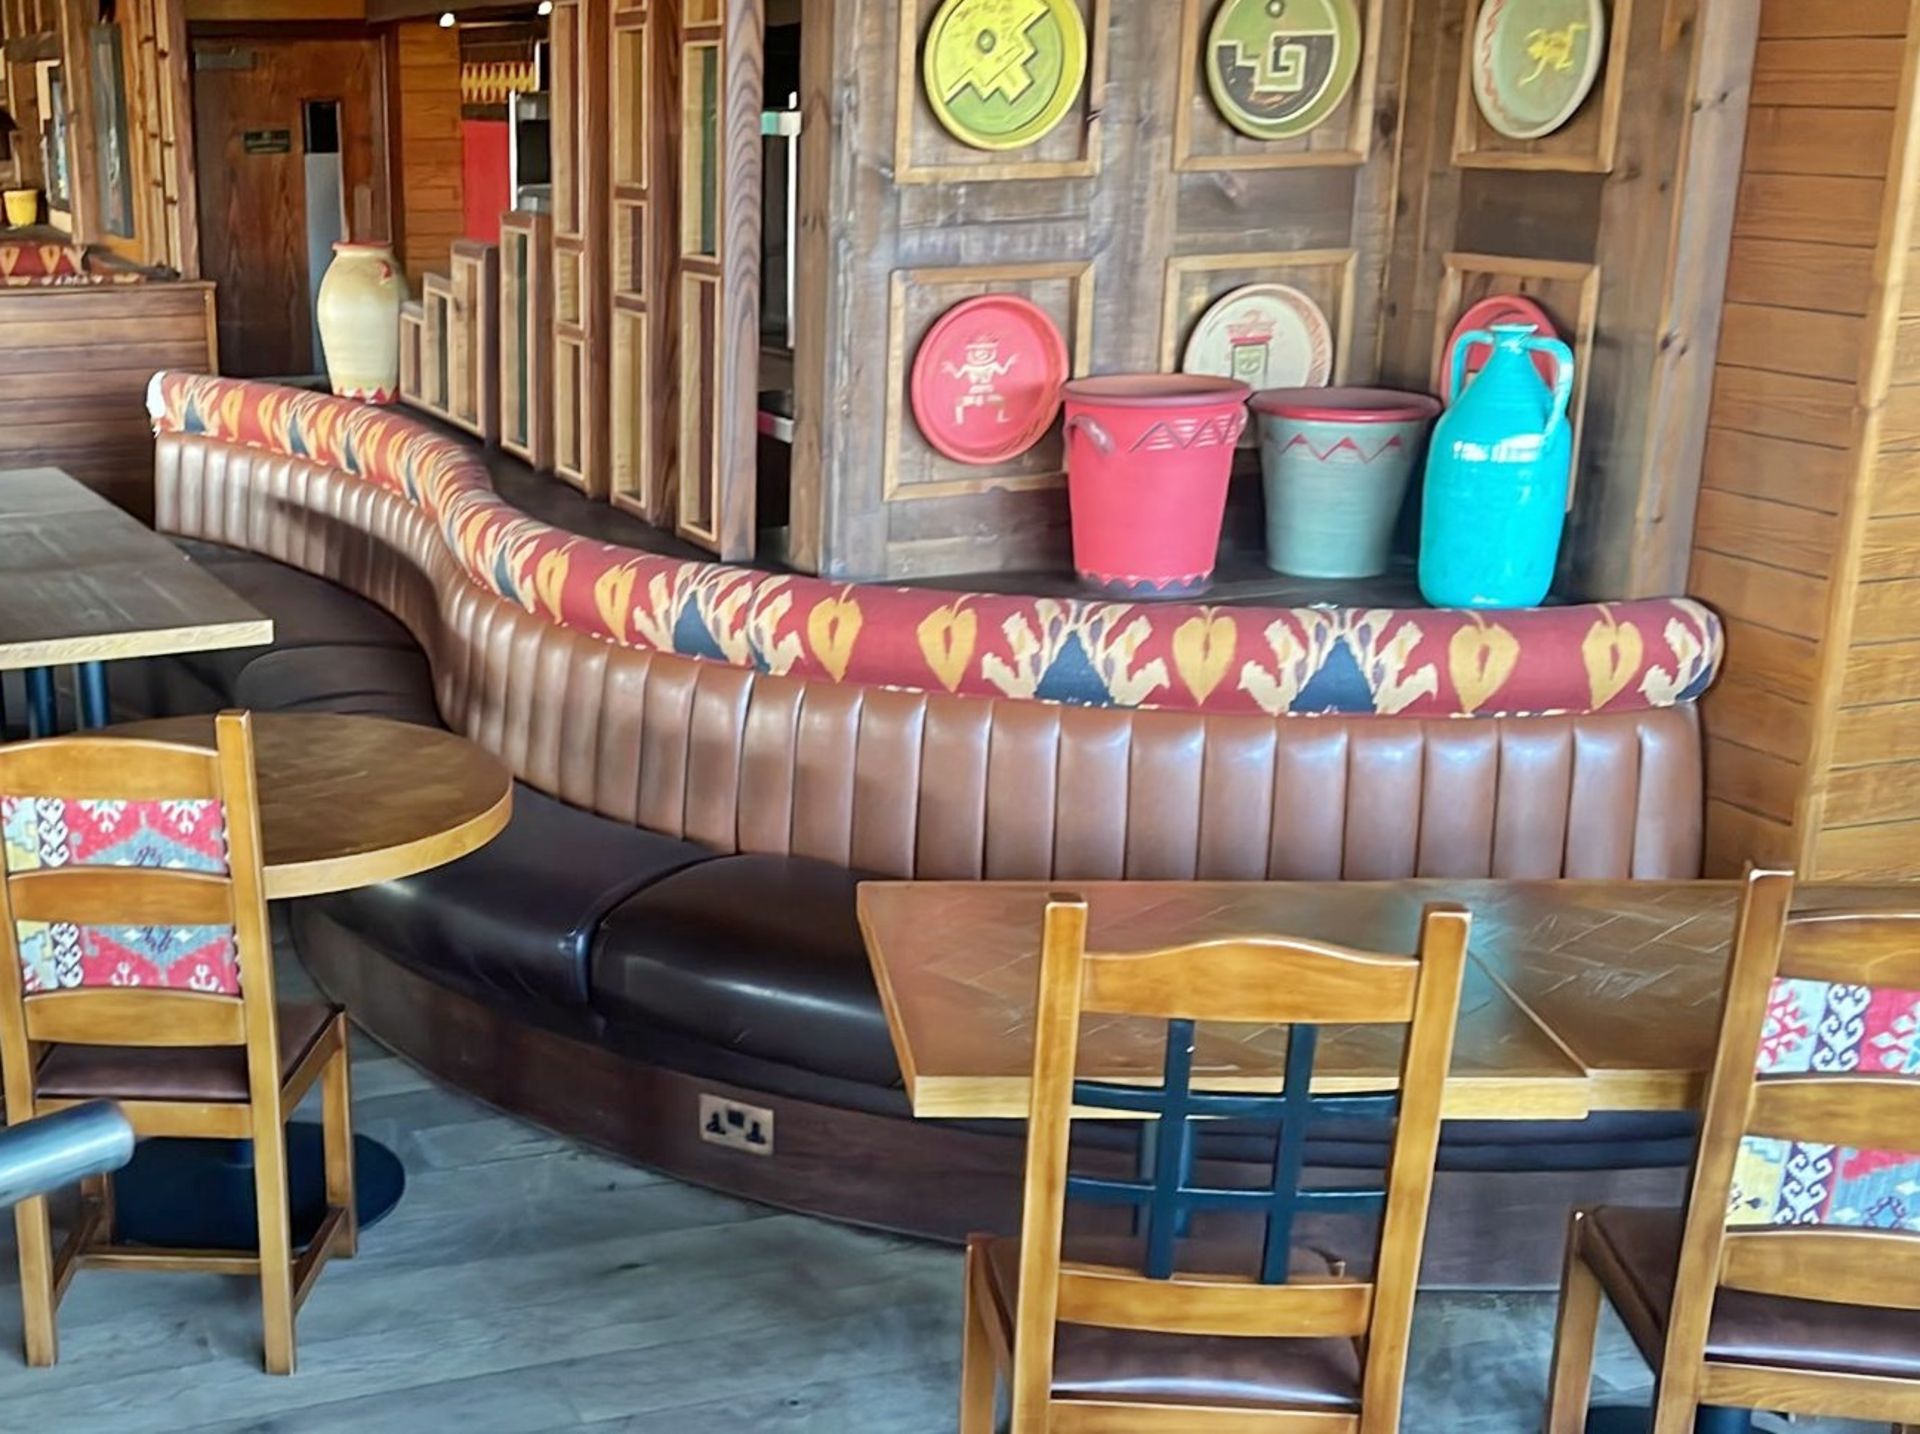 1 x Restaurant Curved Long Seating Bench - Features Brown Faux Leather Seat Pads and Light Brown